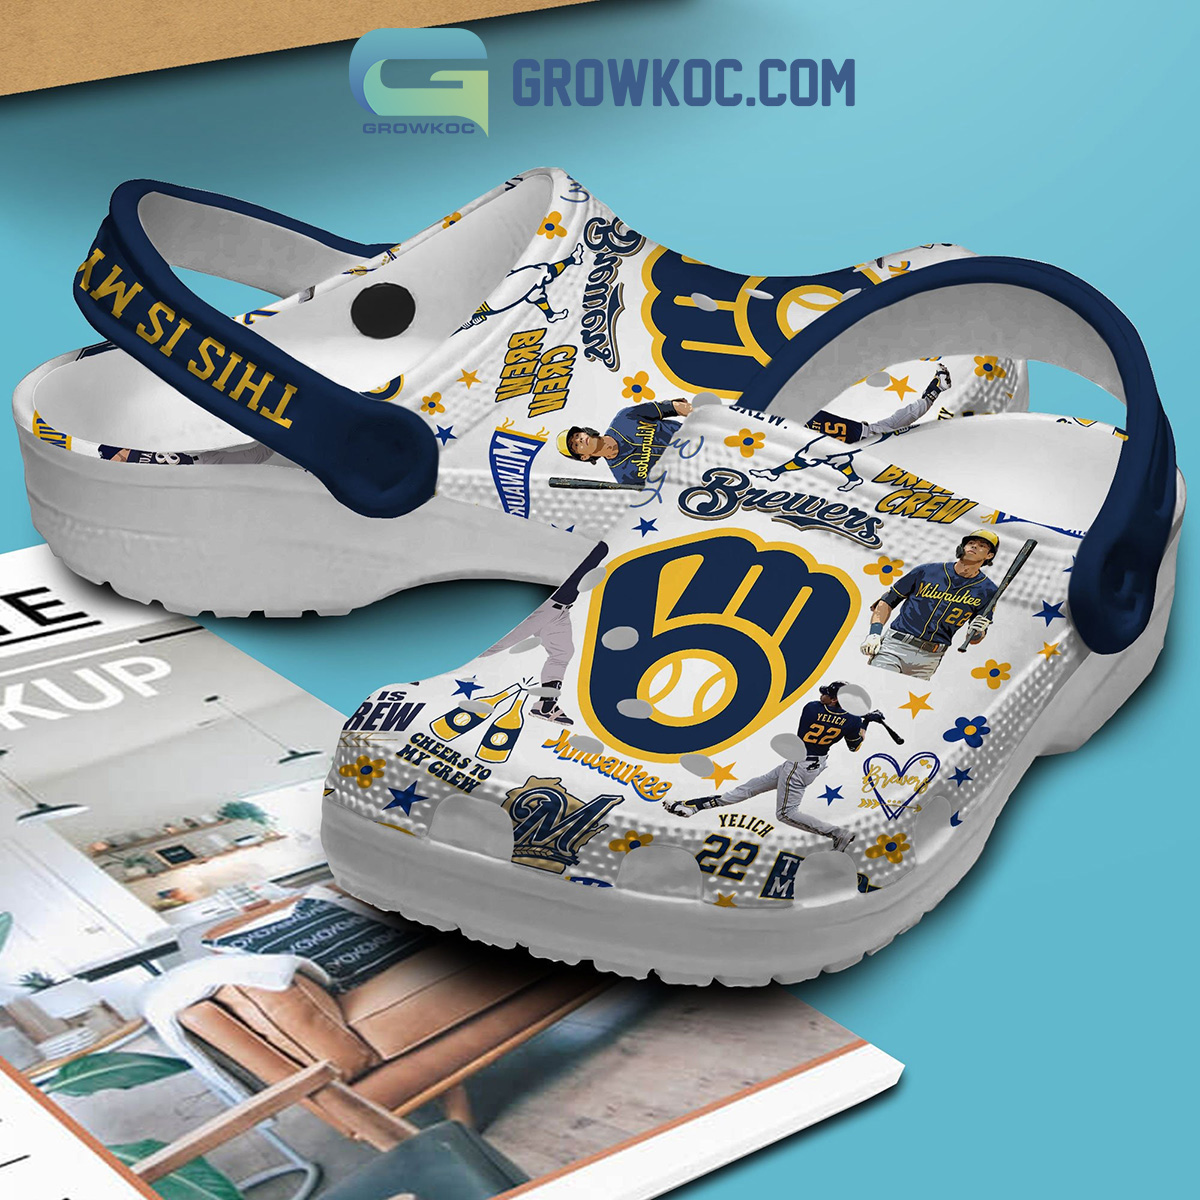 This Is My Crew Milwaukee Brewers Clogs Crocs